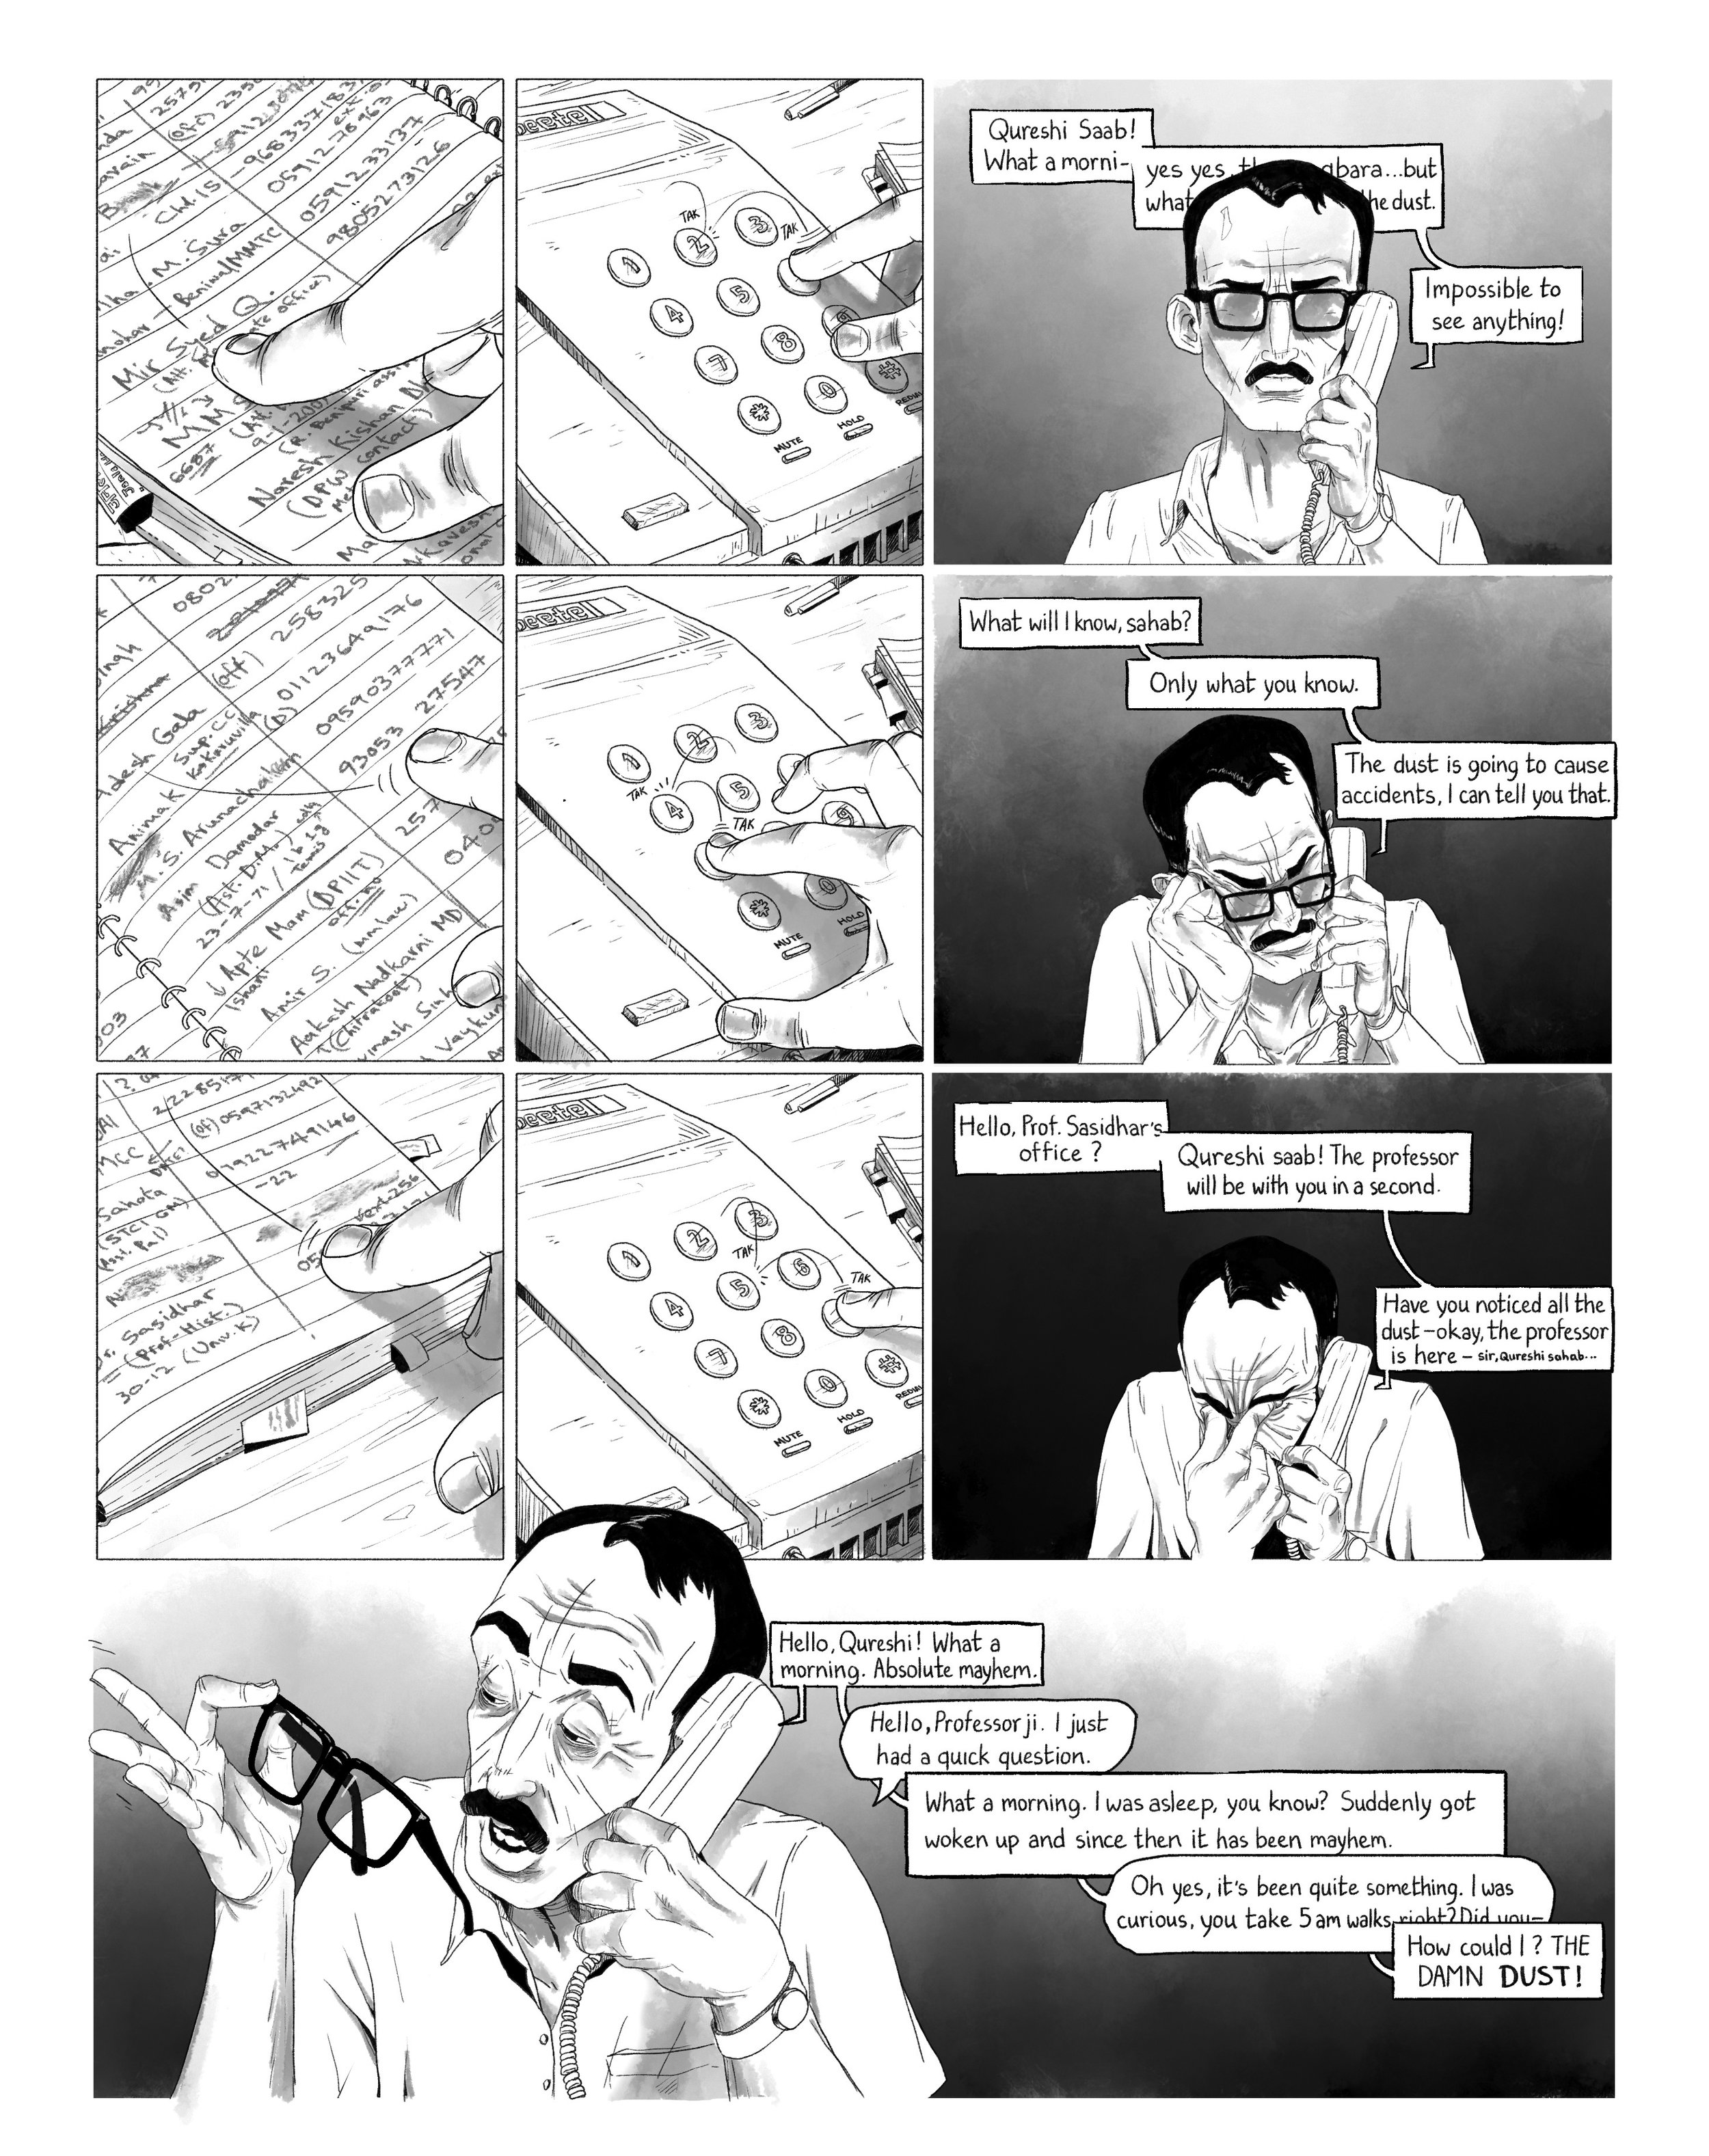 ATLEO-Chapter 1-Qureshi on the phone-1.jpg